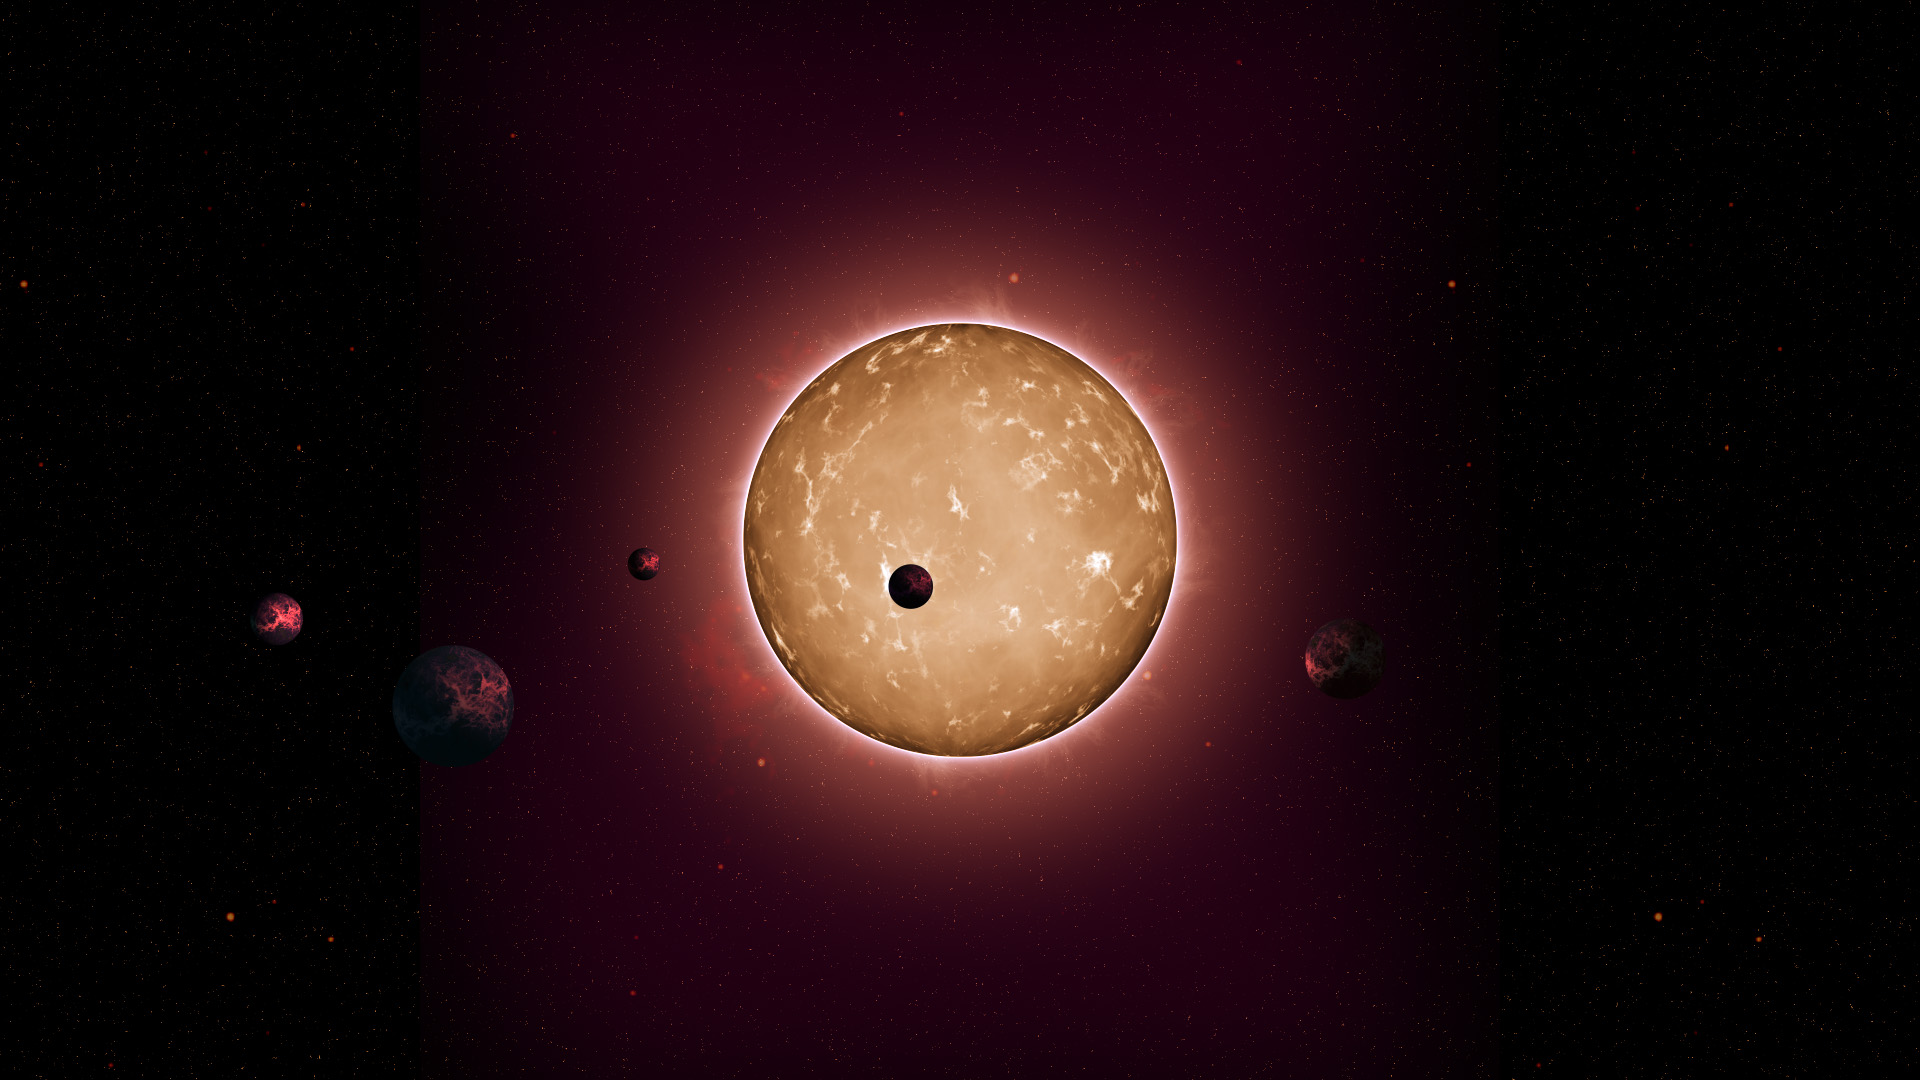 Artist's concept of the recently discovered tightly packed and ancient exoplanetary system named Kepler-444. Astroseismic studies of the star's oscillations, allowed astronomers to determine that it is the oldest planetary system discovered to date, with an age of approximately 11 billion years. Image Credit: Tiago Campante/Peter Devine/University of Birmingham